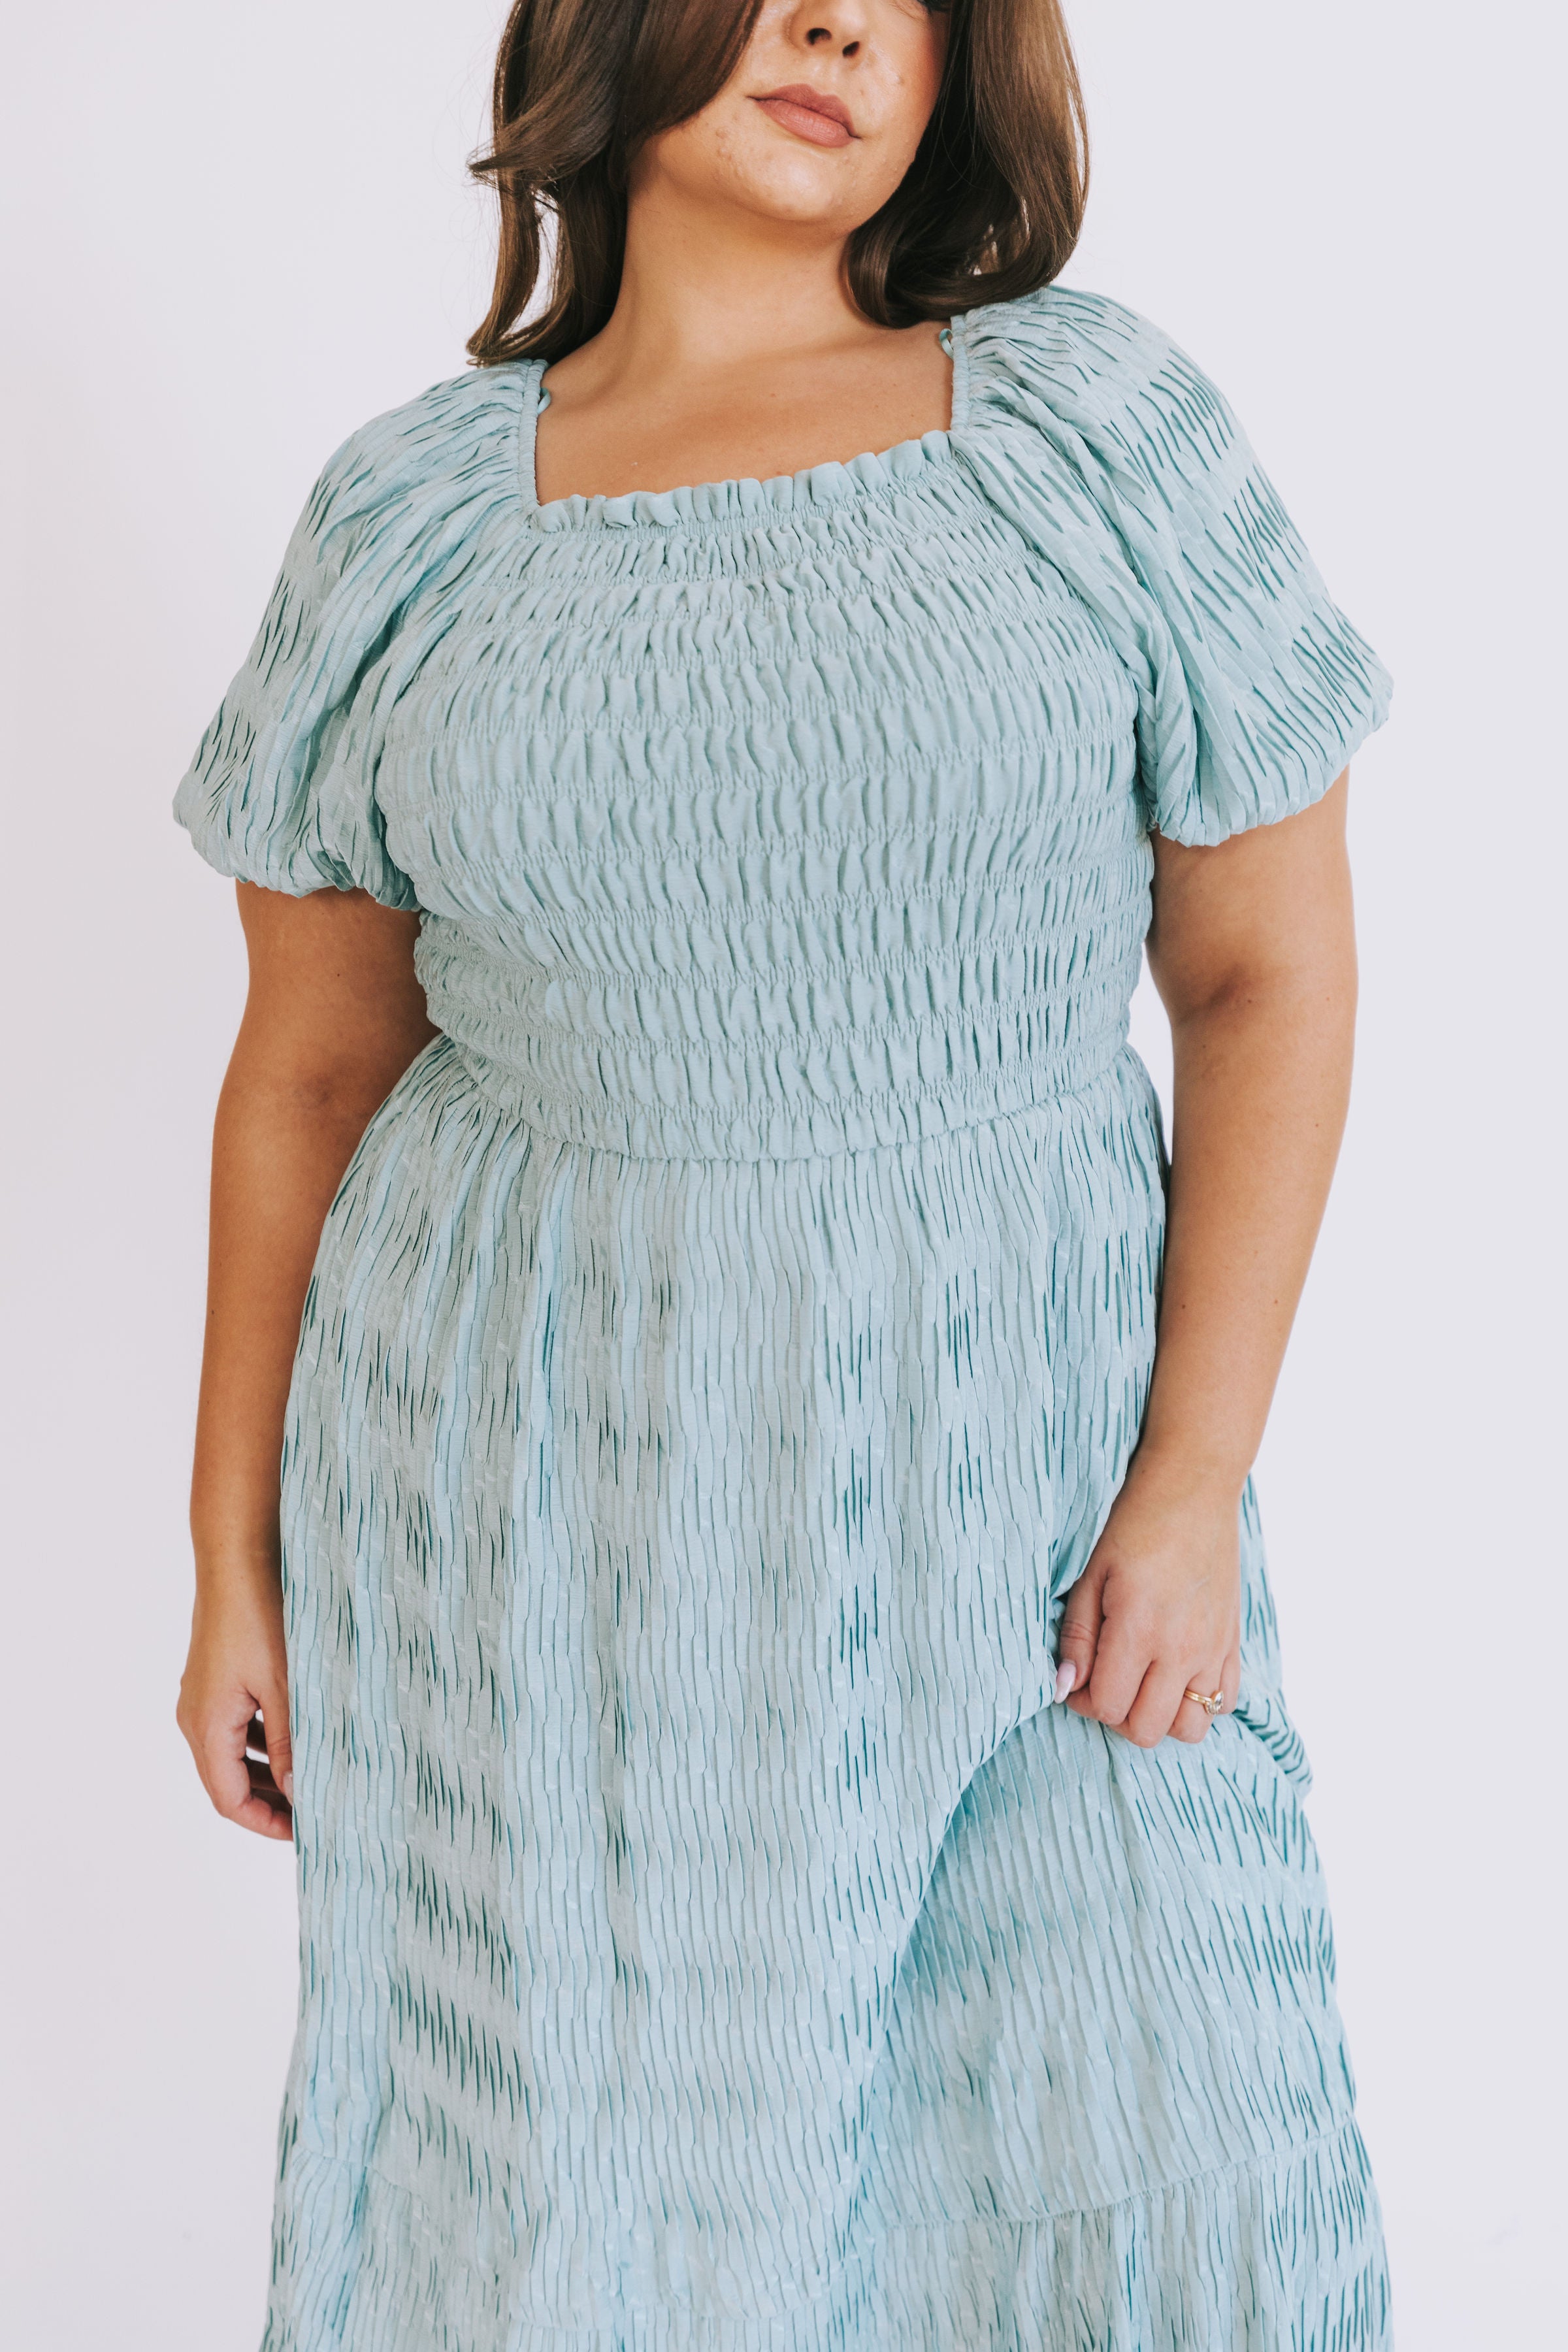 PLUS SIZE - The Way You Love Me Dress